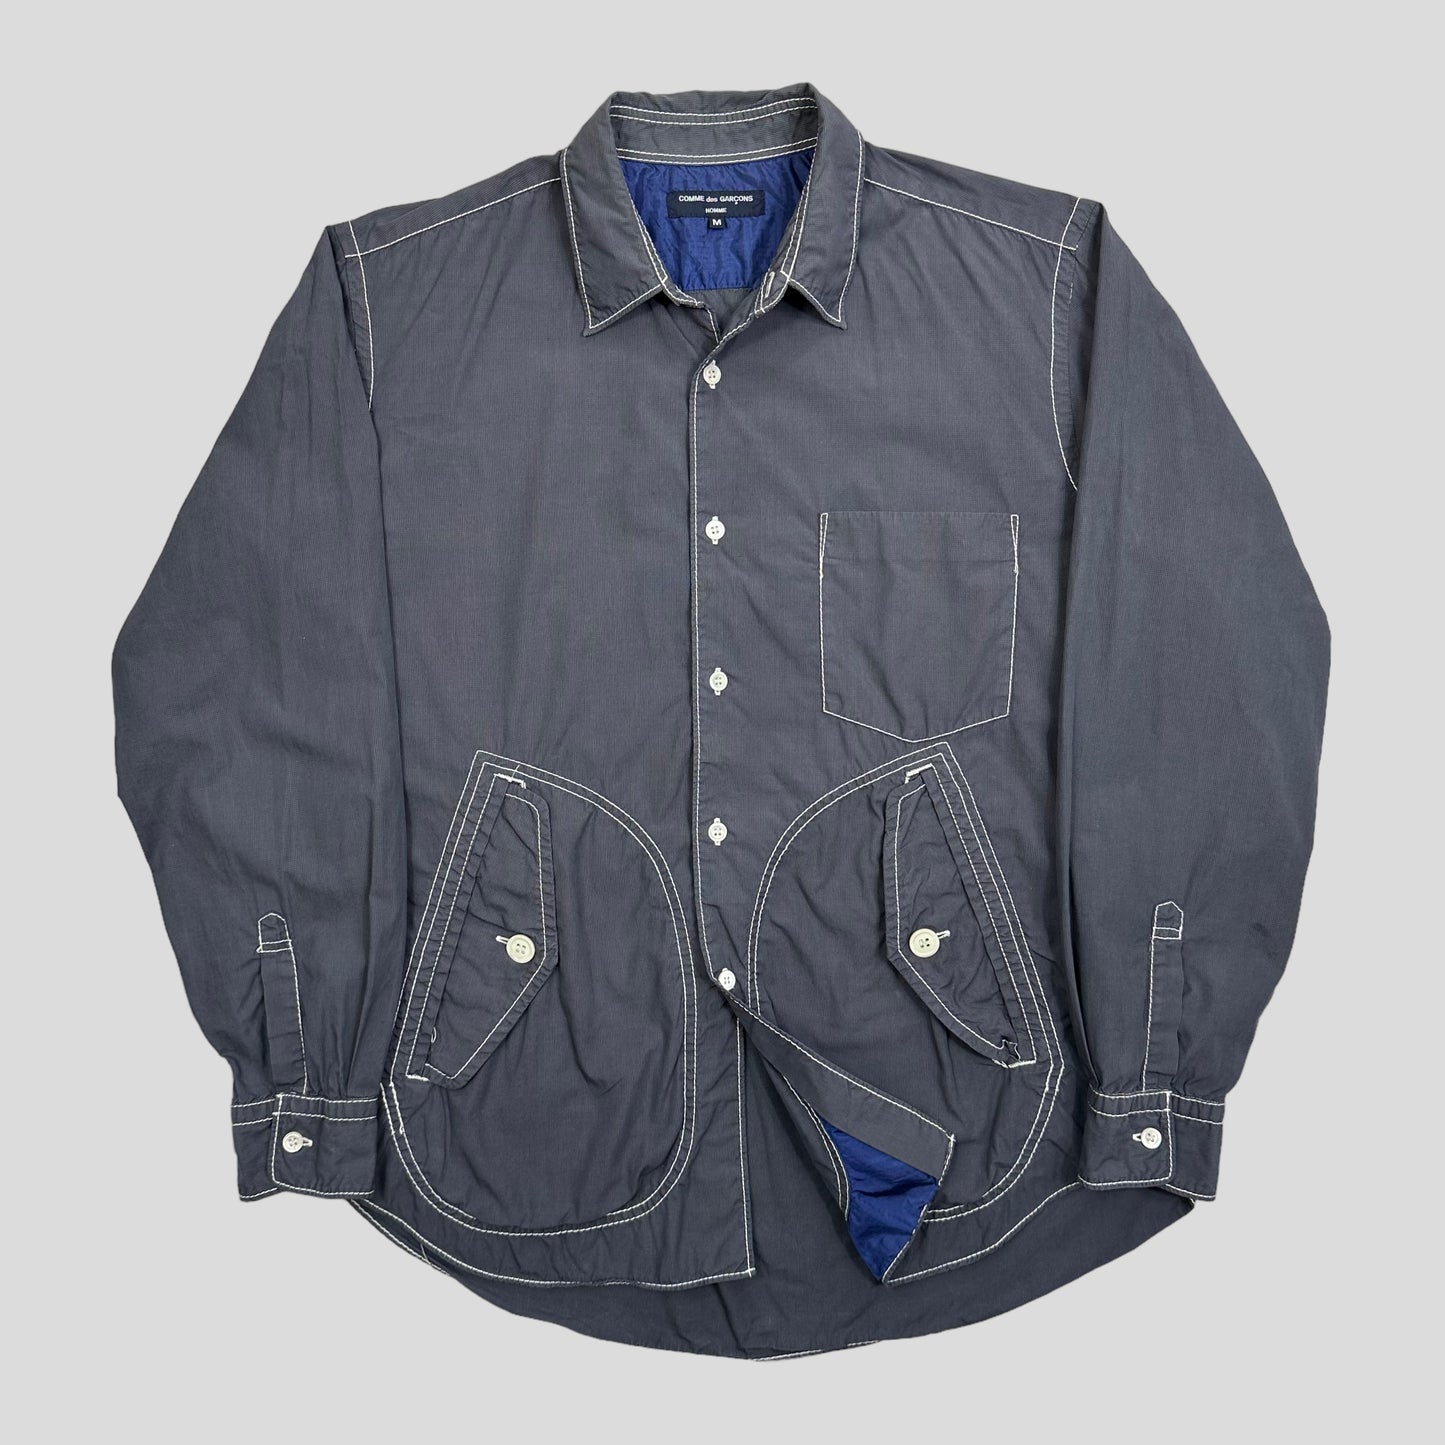 CDG Homme 2004 Windproof Cargo Shirt - M/L